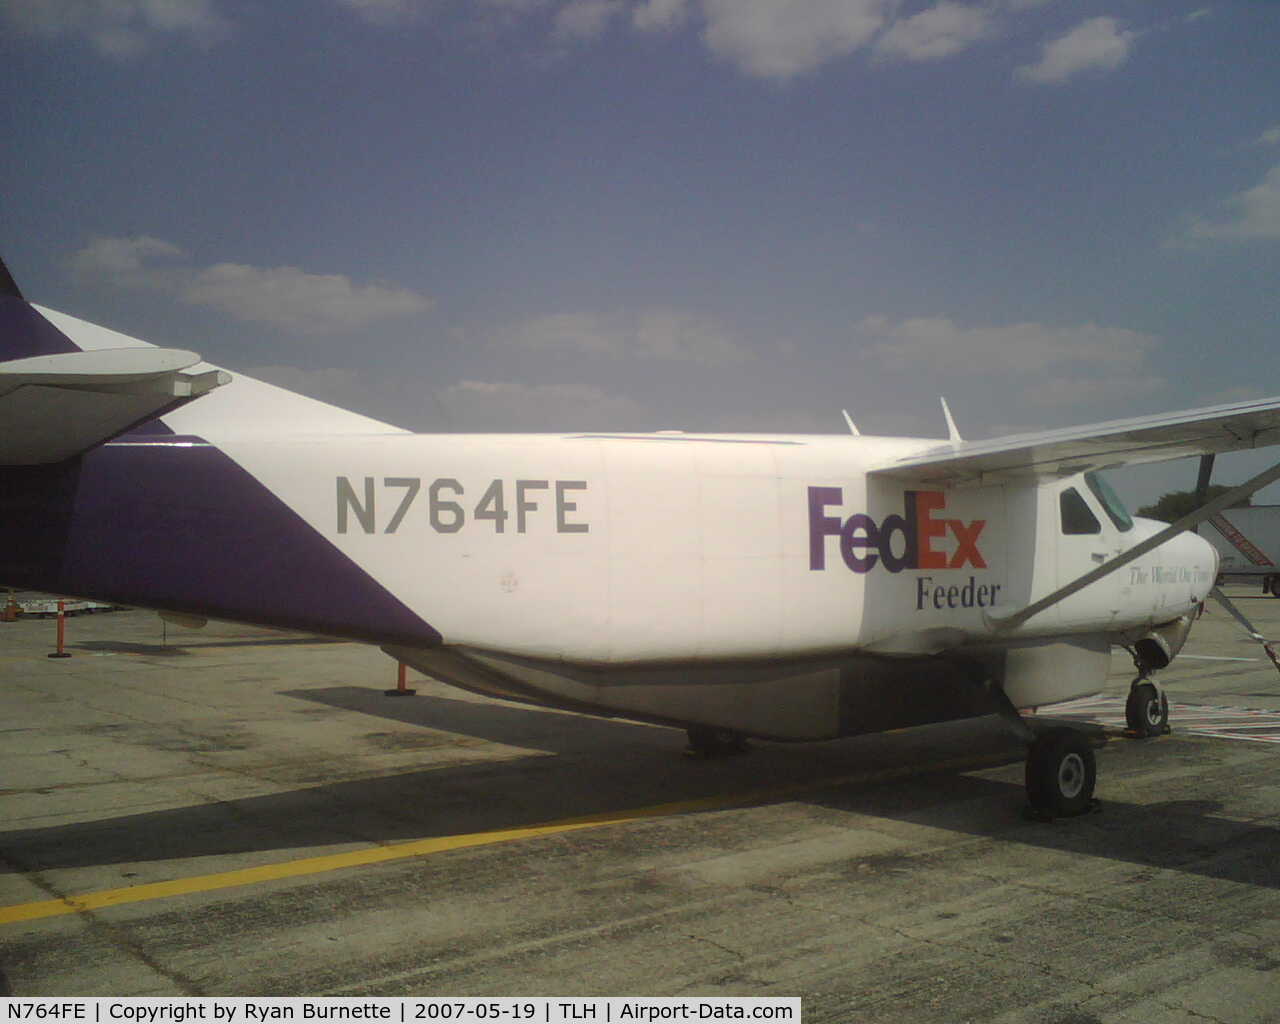 N764FE, 1991 Cessna 208B Super Cargomaster C/N 208B0258, Commonly parked at the FedEx ramp at Tallahassee Regl.